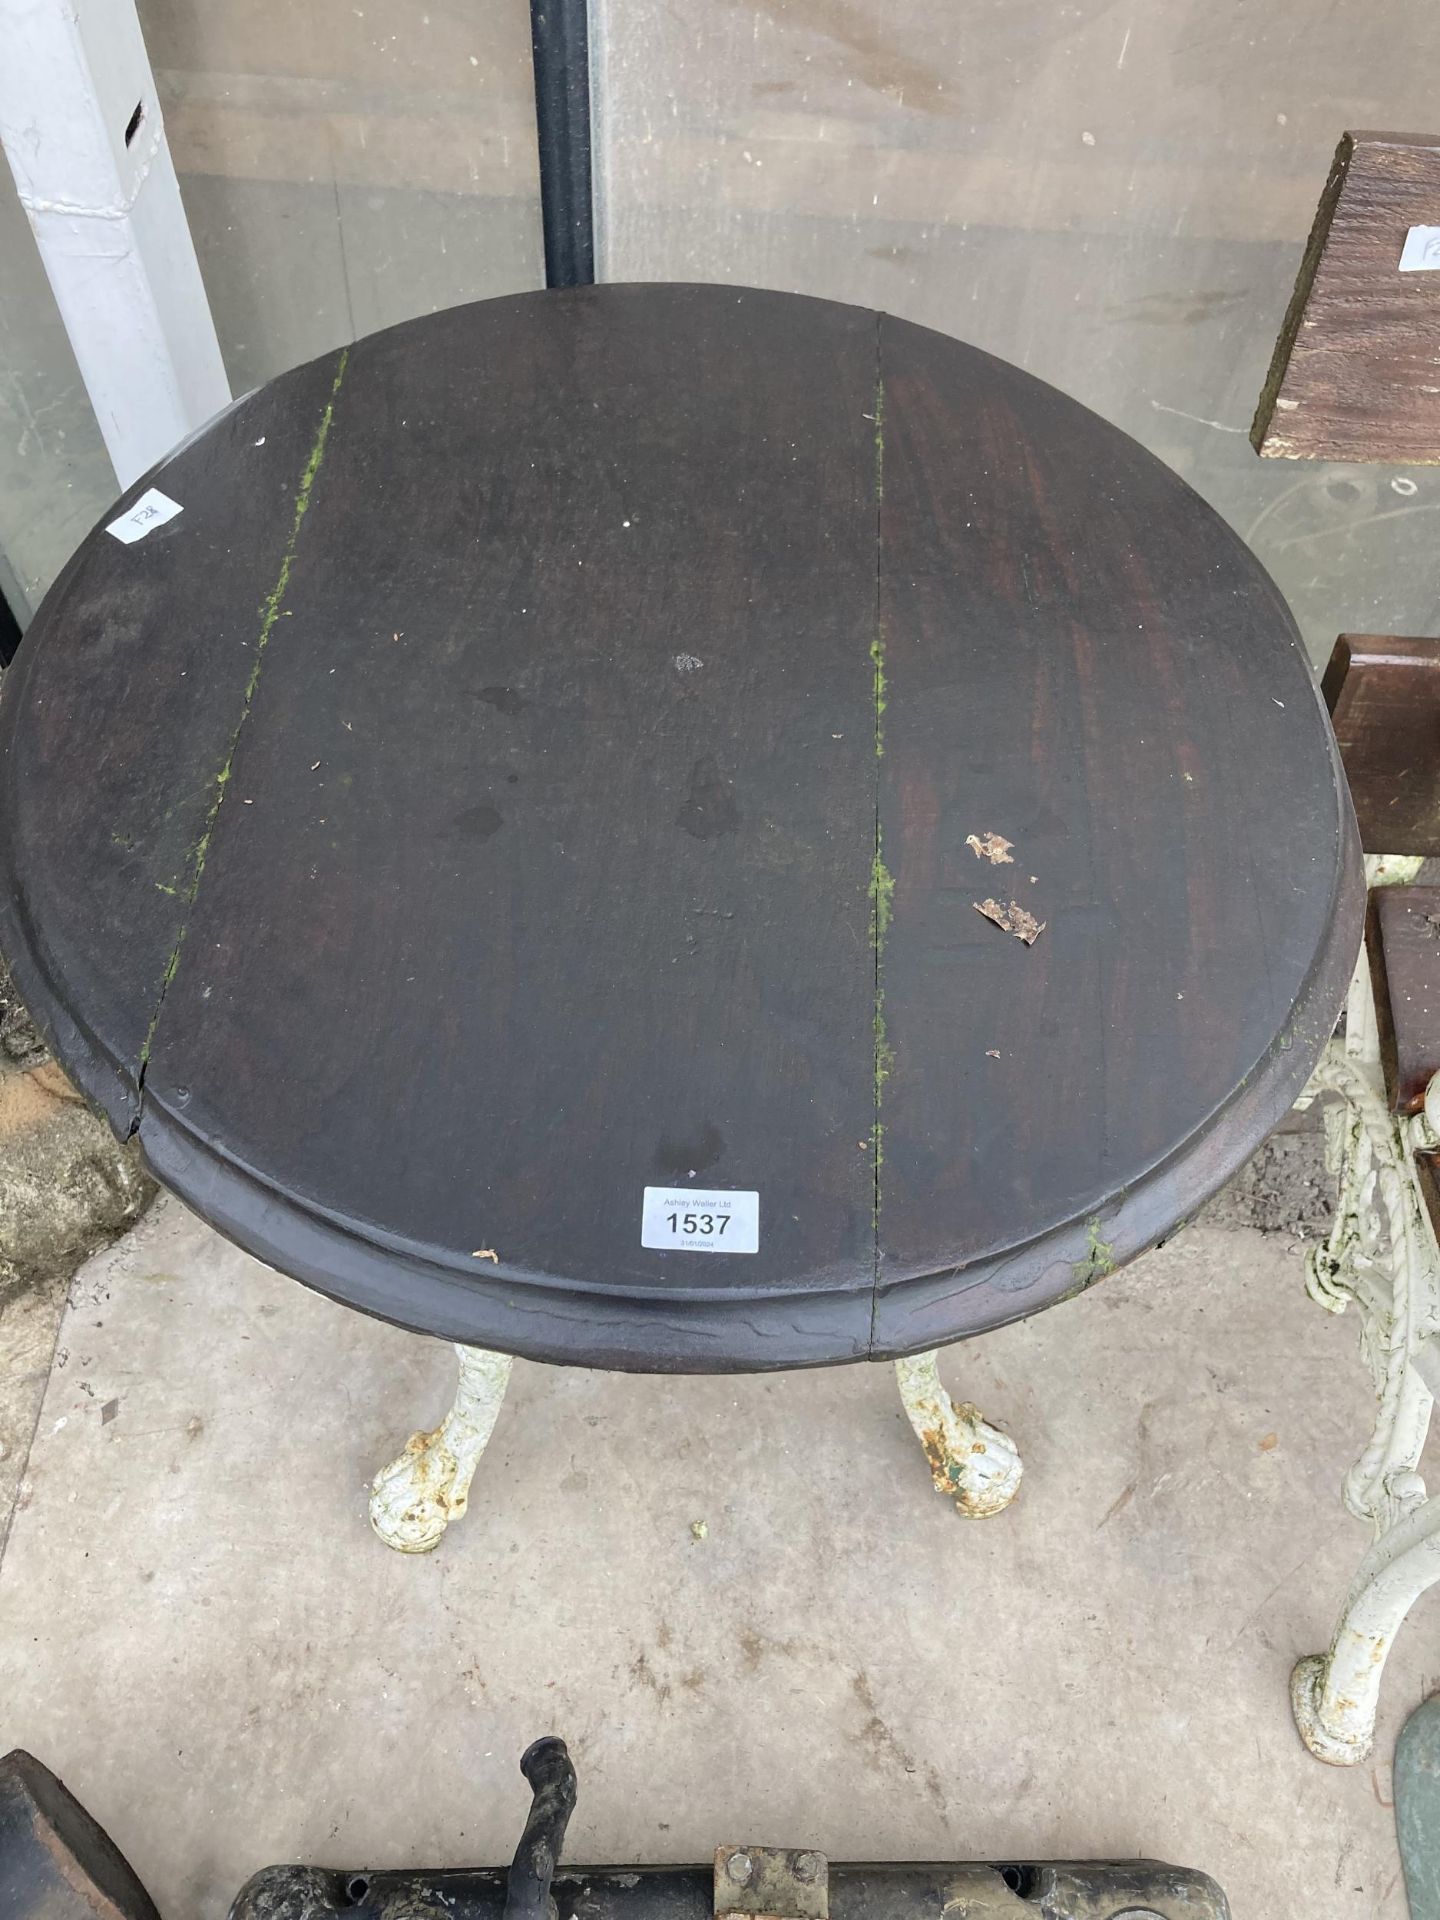 A VINTAGE PUB TABLE WITH CAST IRON BASE AND WOODEN TOP - Image 2 of 3